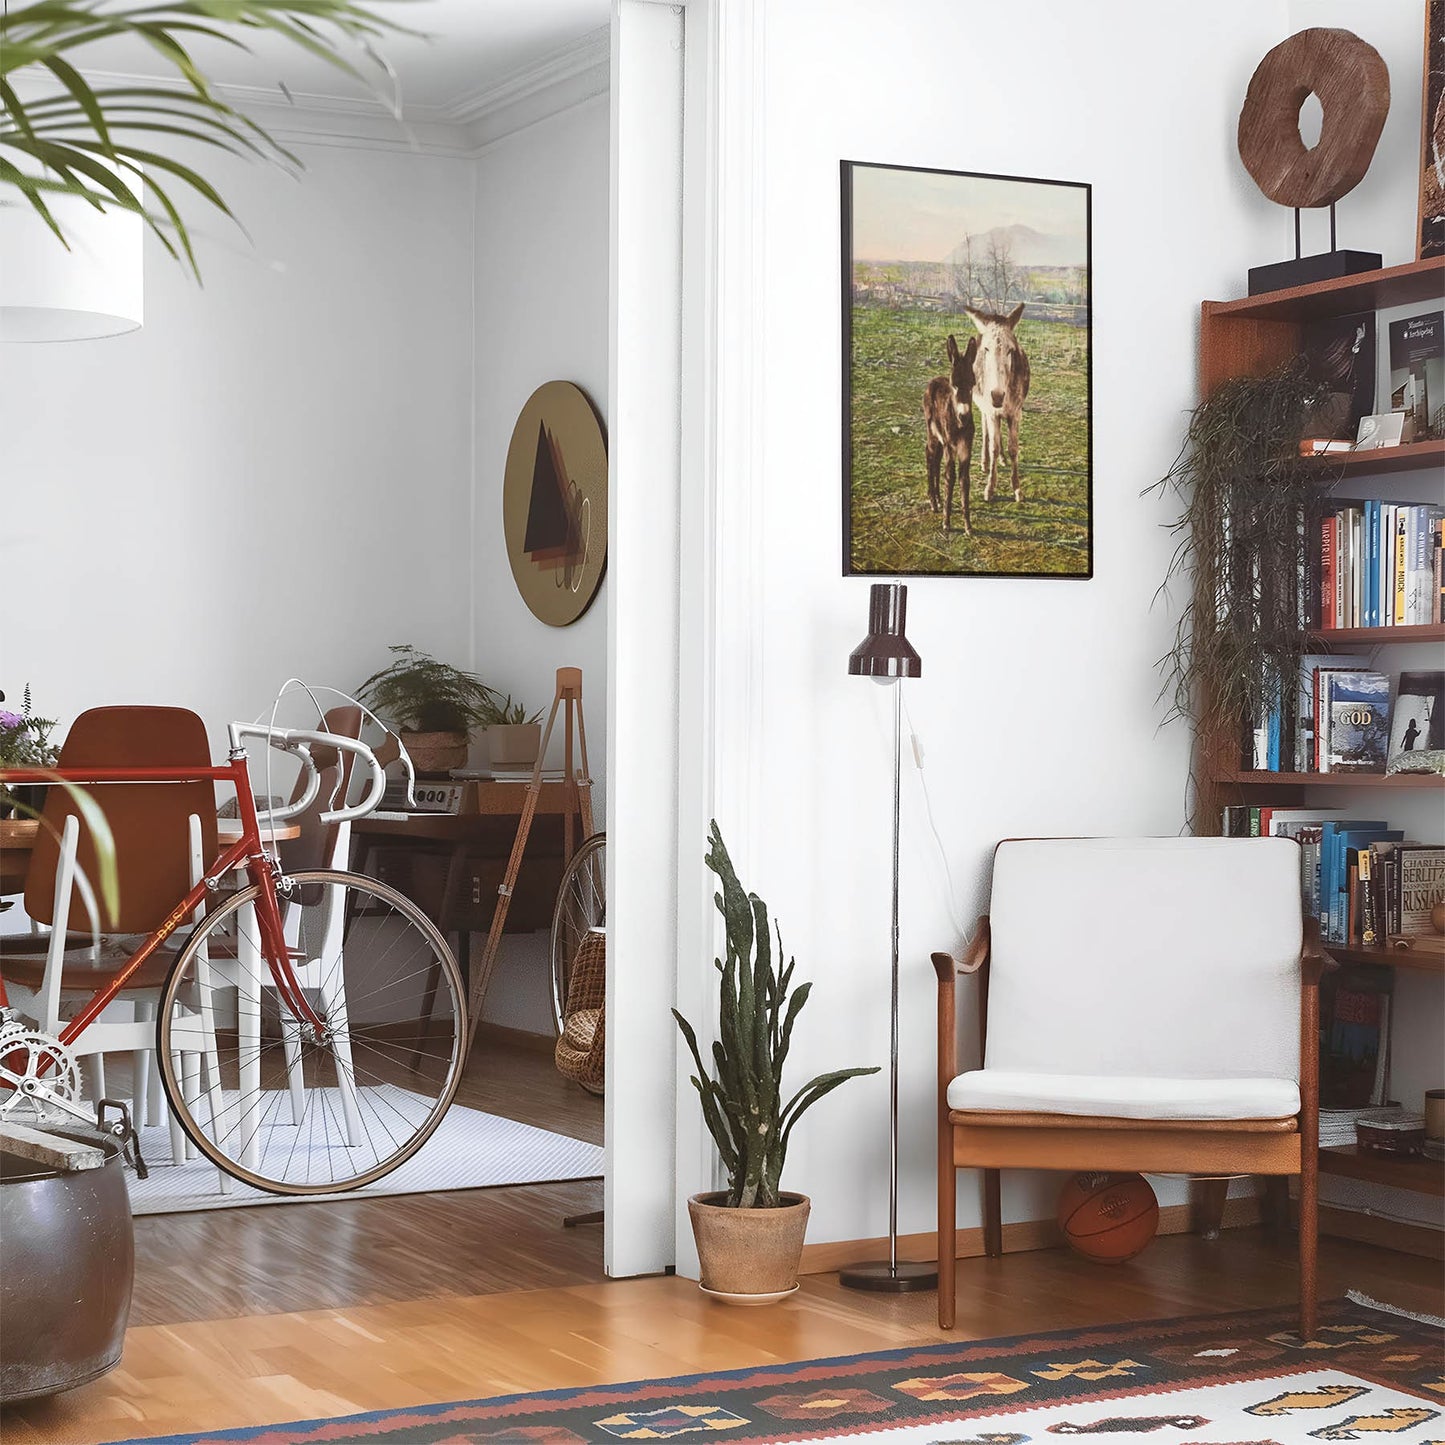 Eclectic living room with a road bike, bookshelf and house plants that features framed artwork of a Two Donkey's in the Mountains above a chair and lamp